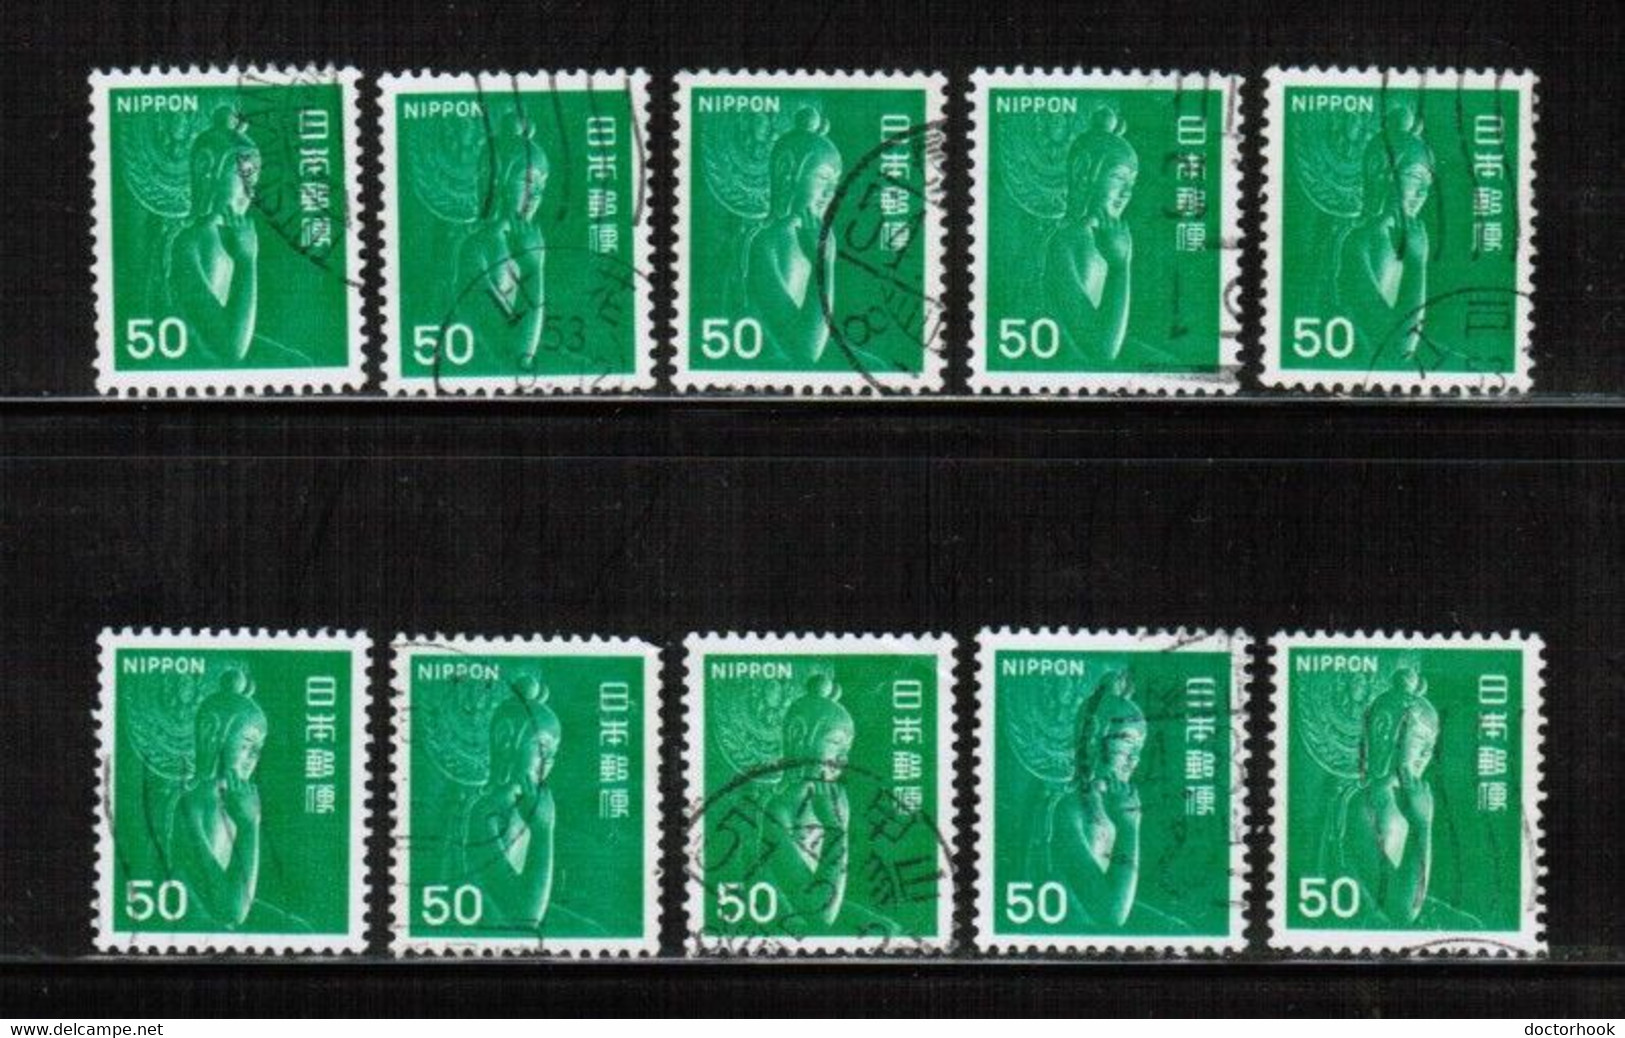 JAPAN   Scott # 1244 USED WHOLESALE LOT OF 10 (CONDITION AS PER SCAN) (WH-602) - Colecciones & Series